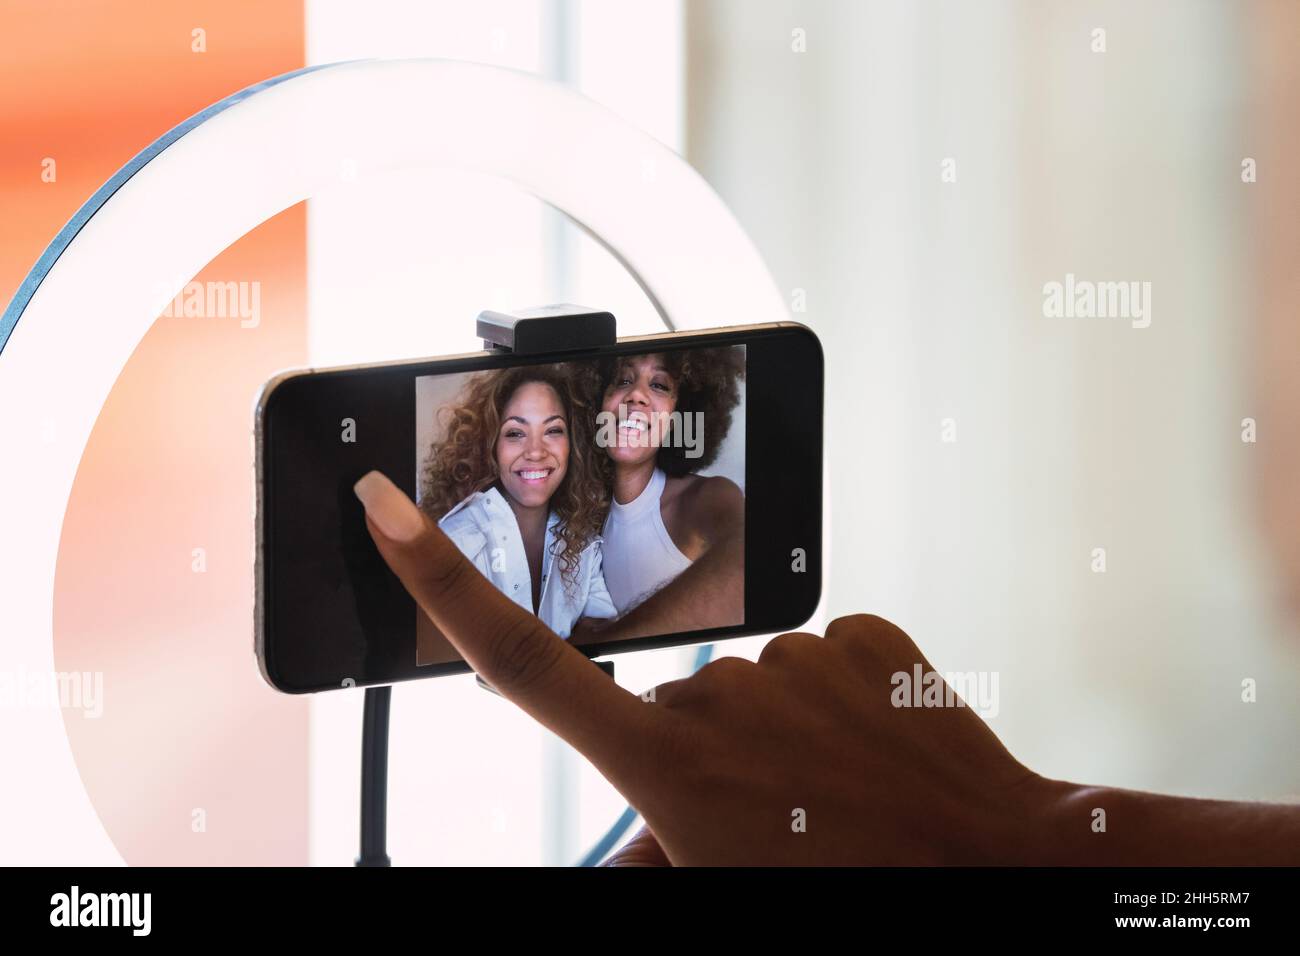 Smiling friends live streaming through smart phone at home Stock Photo